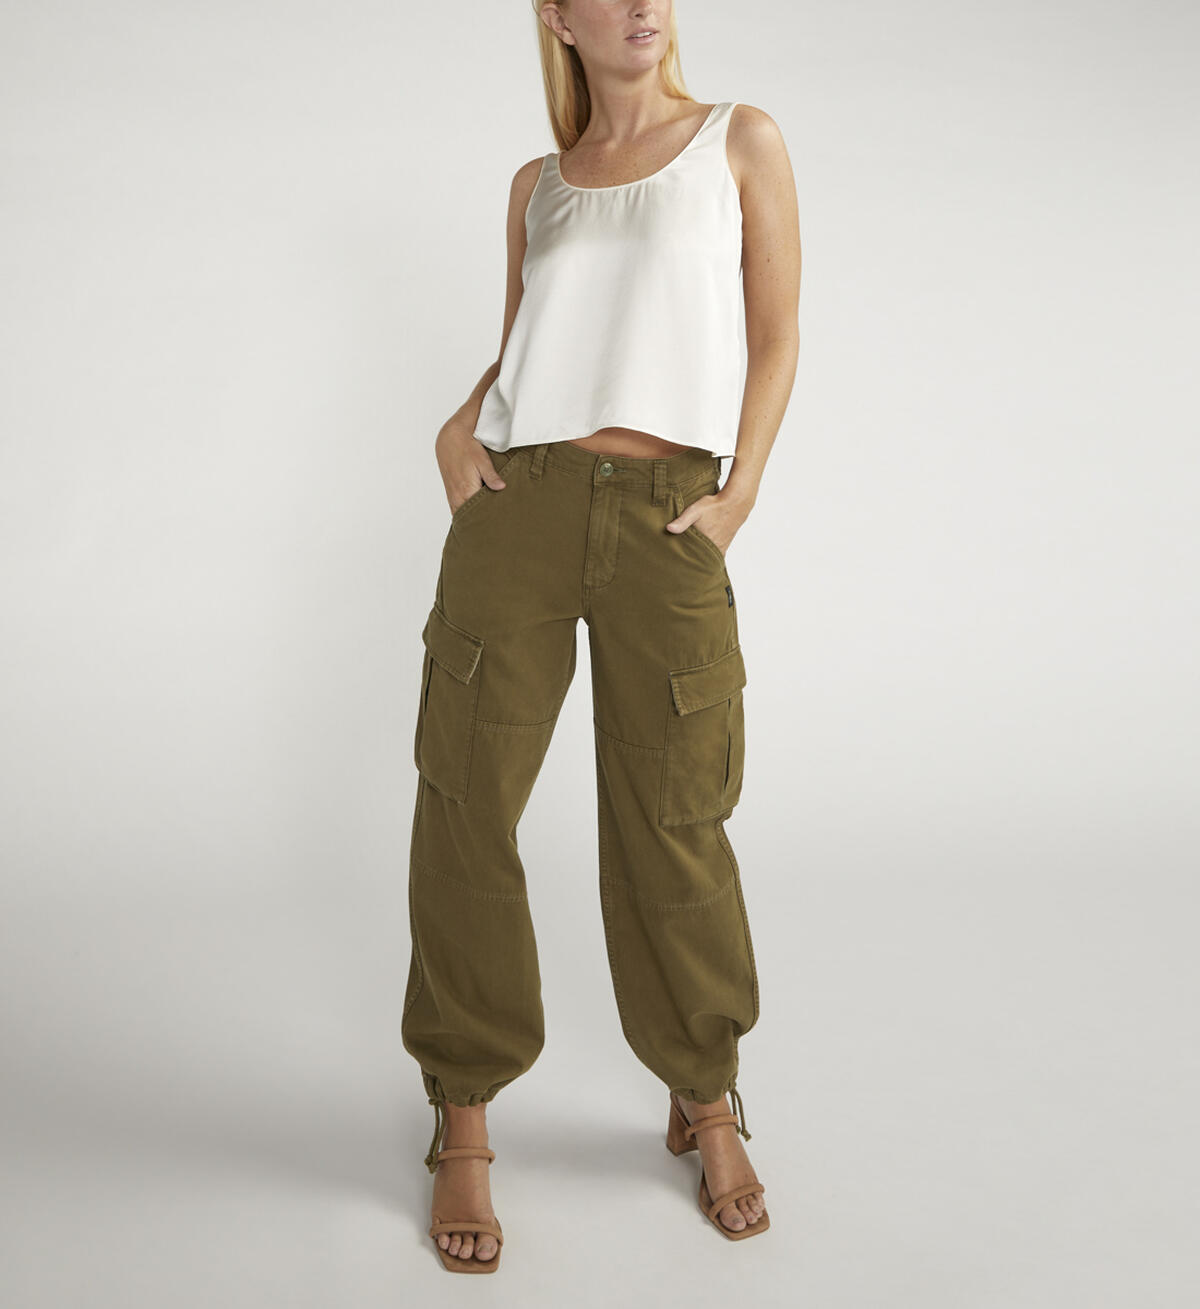 Silver Jeans Relaxed Surplus Cargo Pant MILITARY GREEN